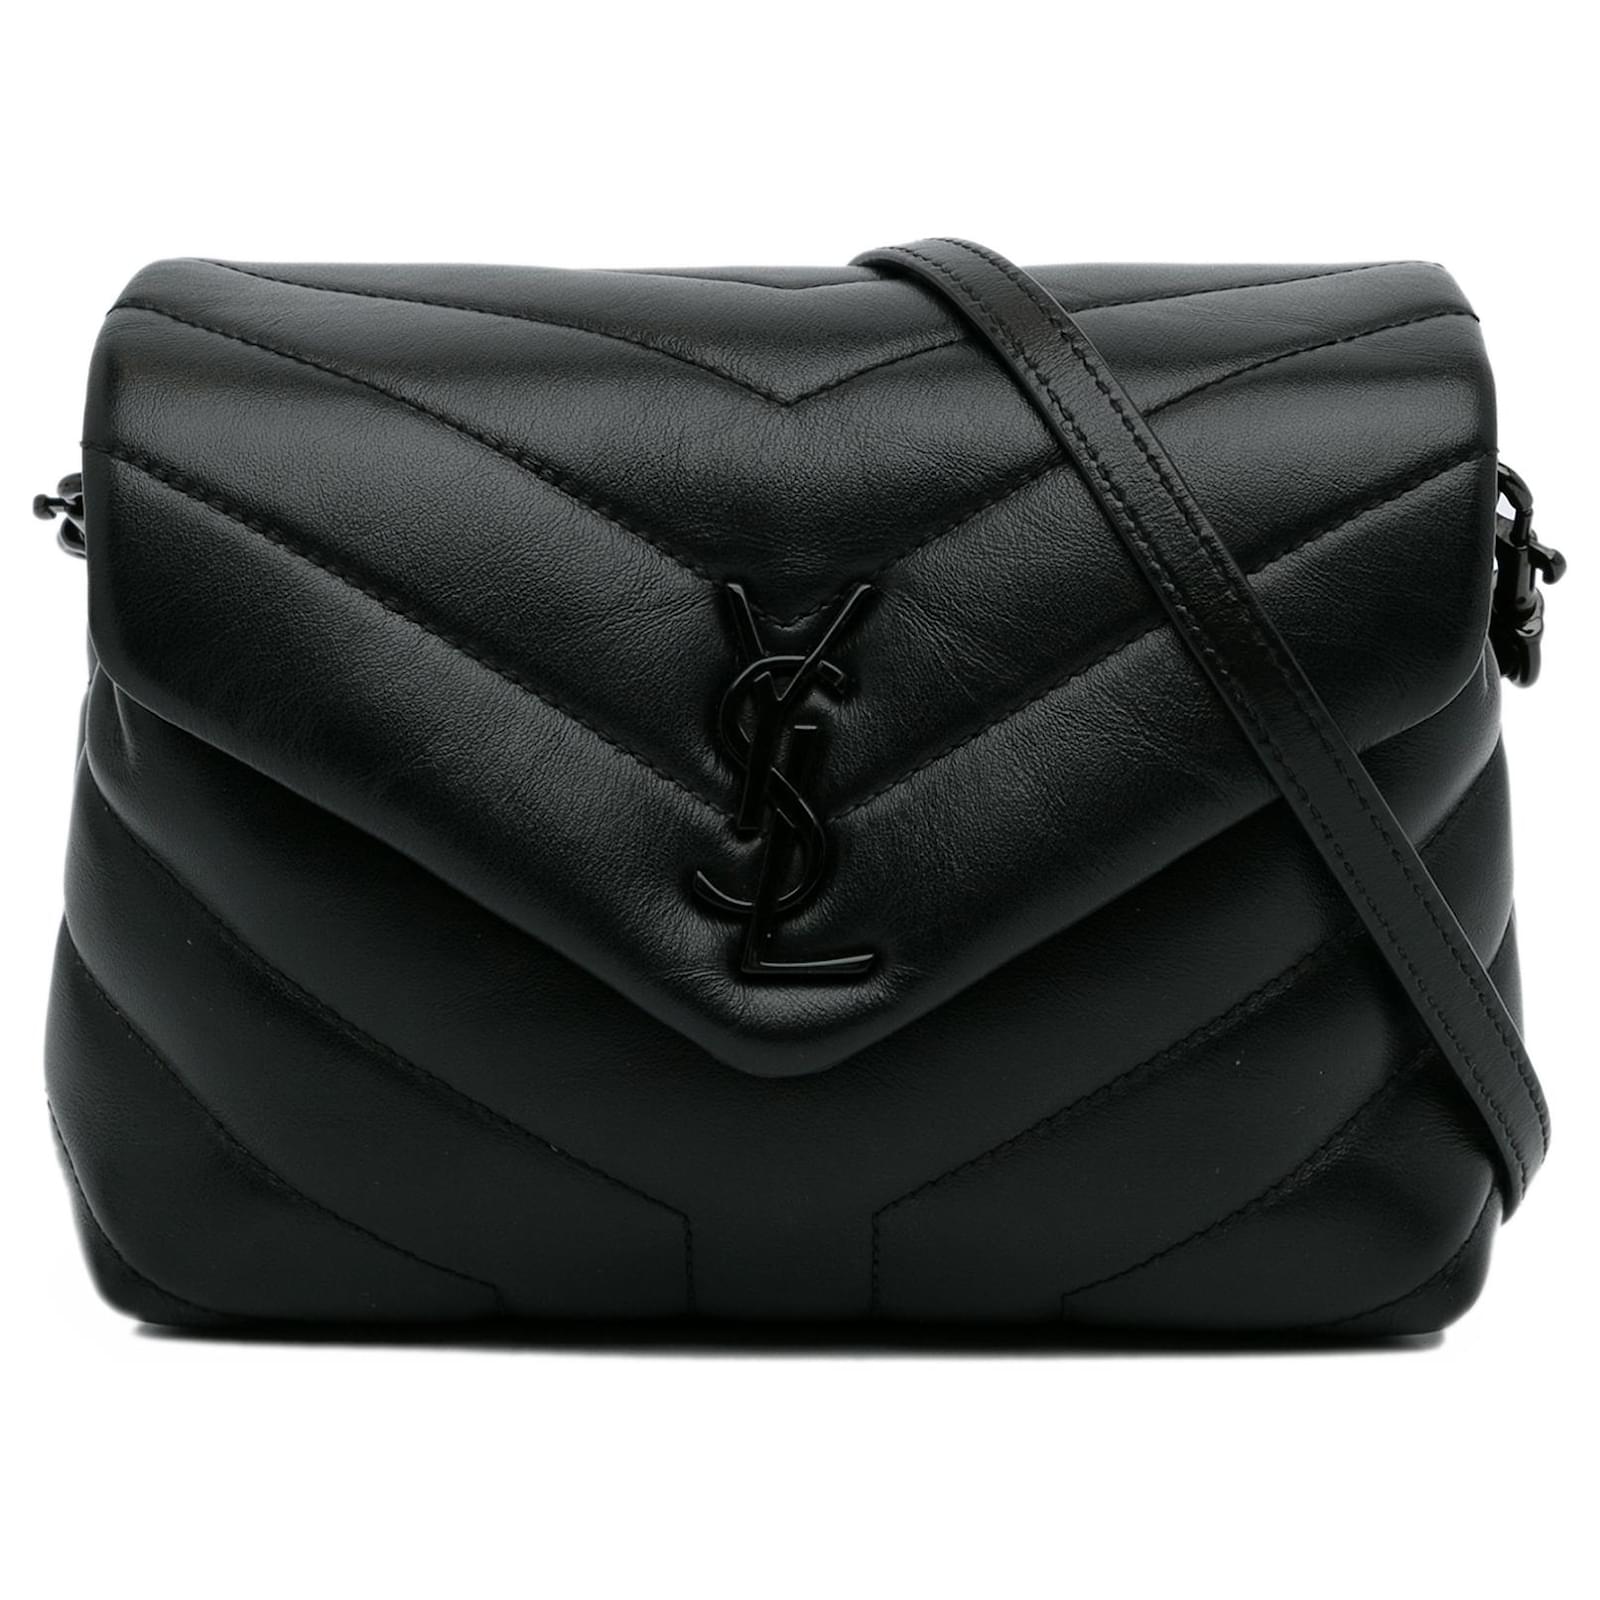 Loulou Toy quilted-leather cross-body bag, Saint Laurent